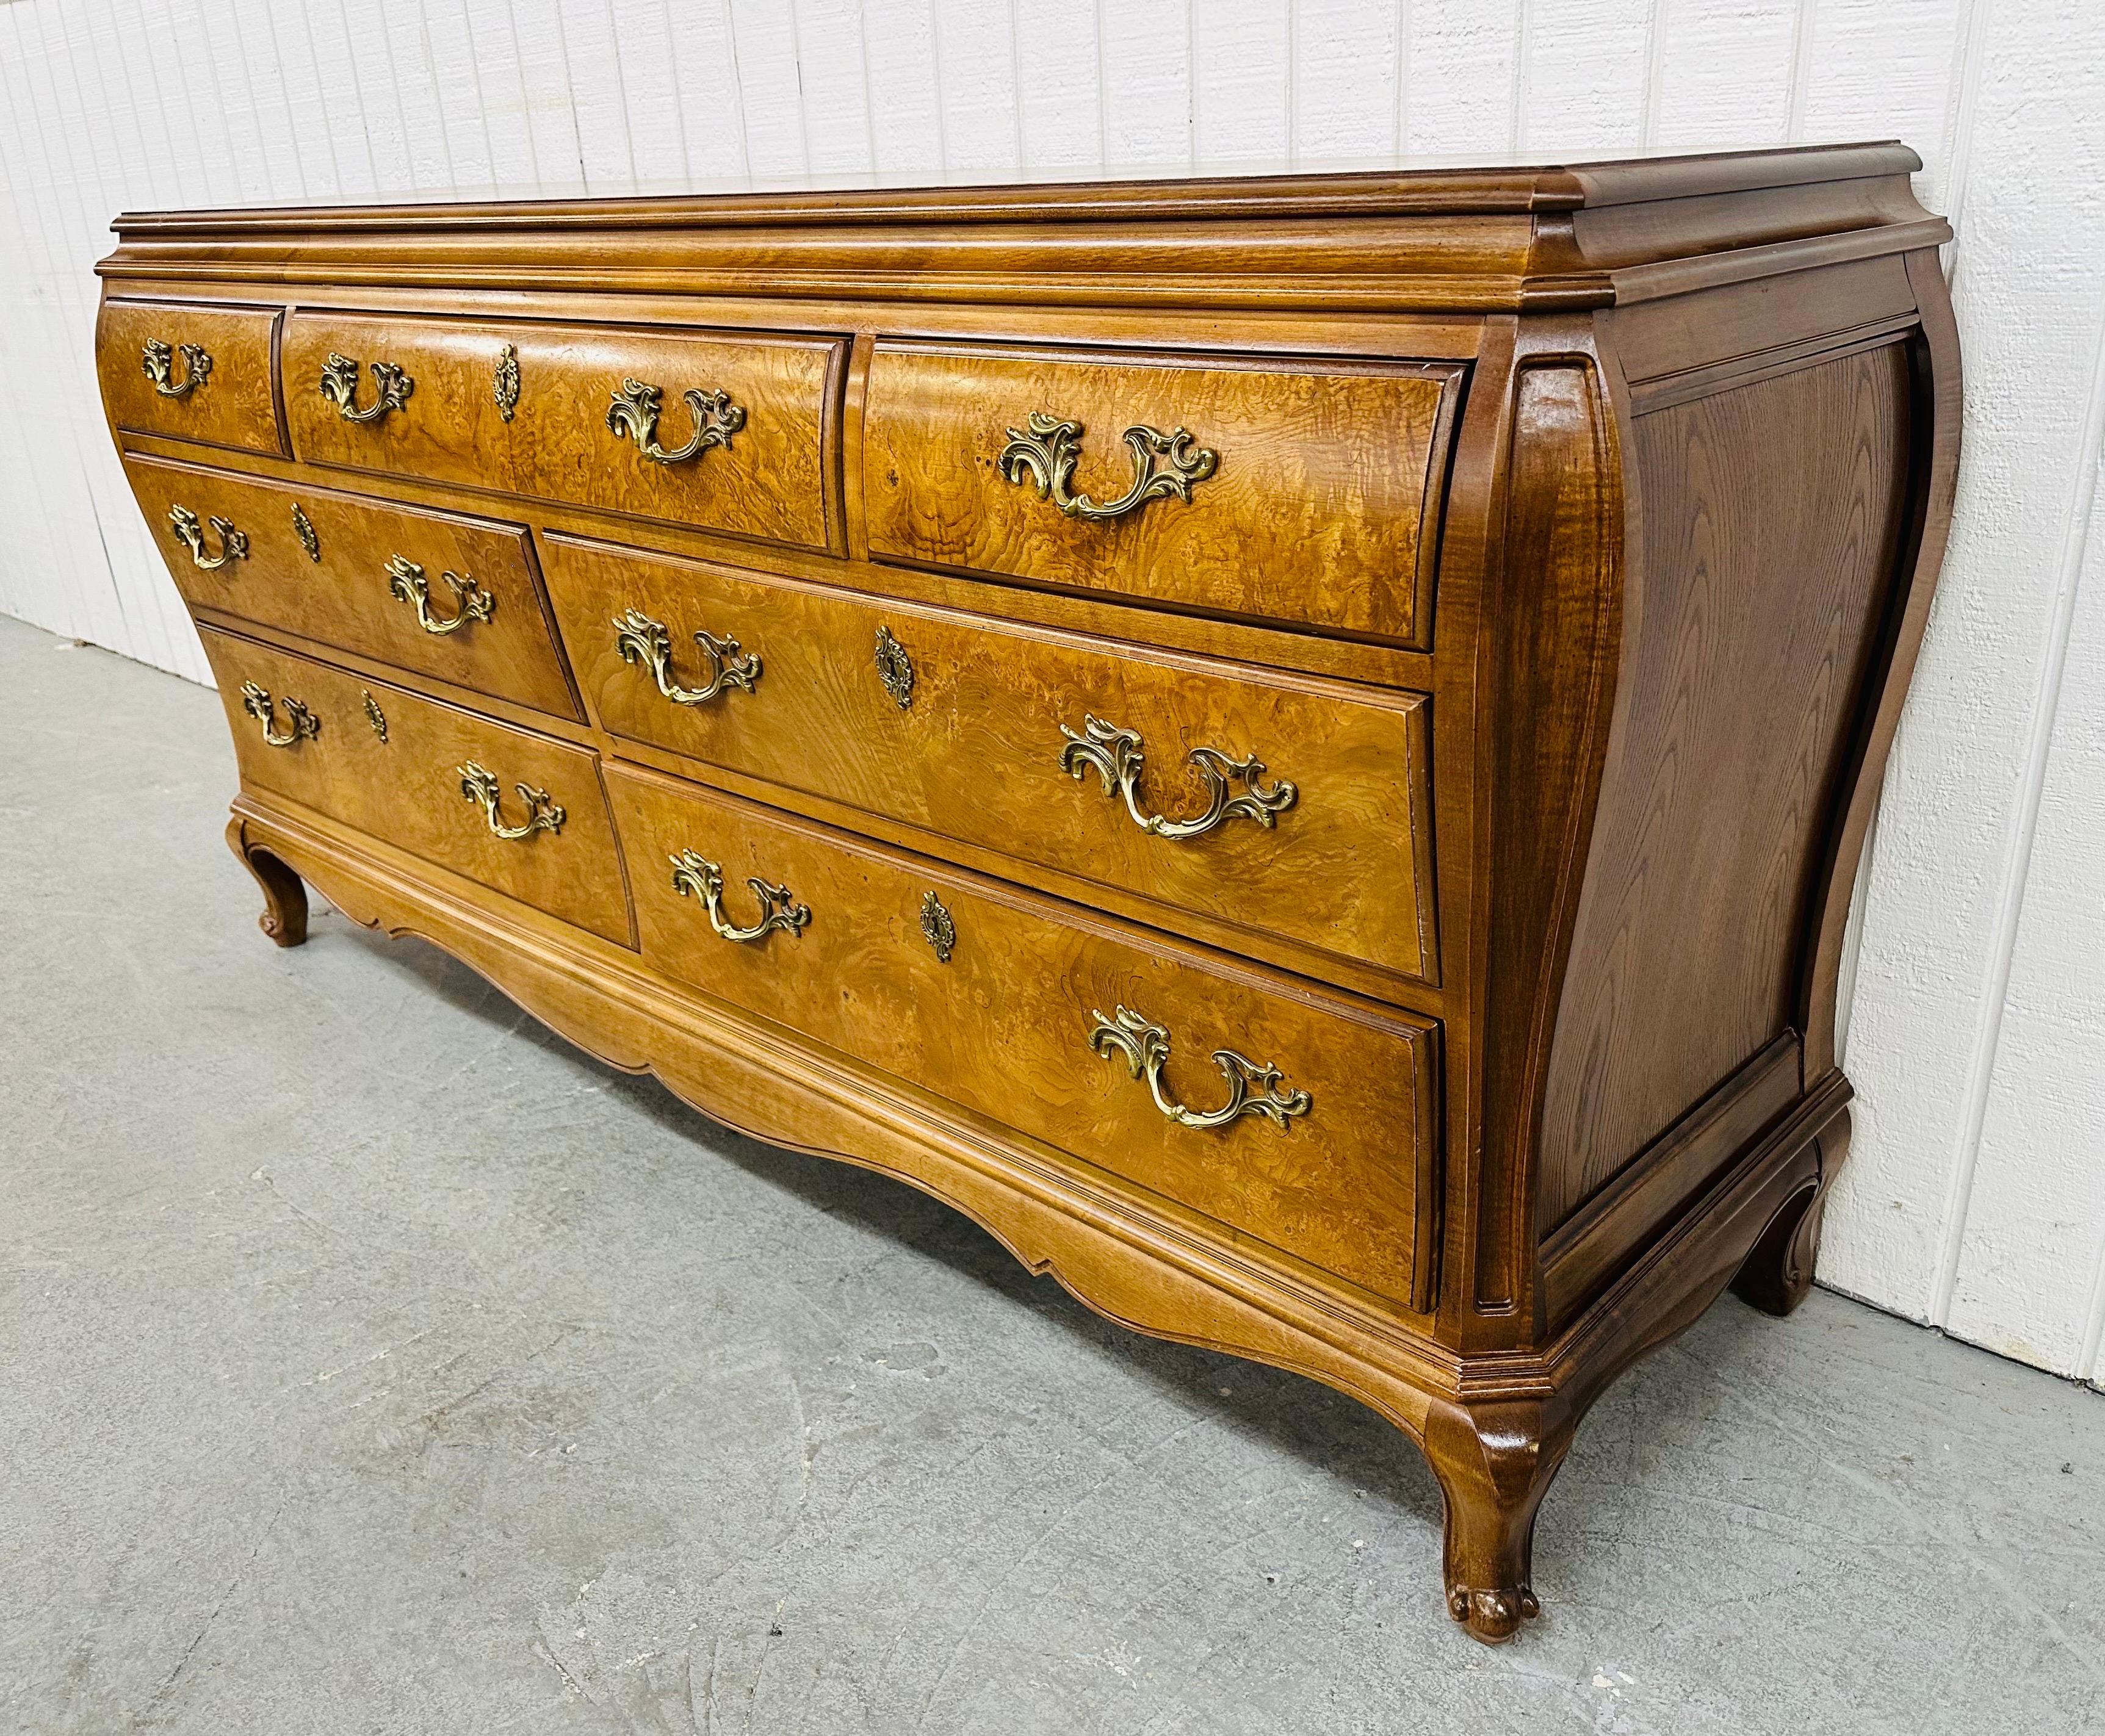 This listing is for a Vintage Henredon French Provincial Burled Wood Dresser. Featuring seven drawers for storage, original French style hardware, French style leg, Bombay shaped sides, and a beautiful burled wood finish. This is an exceptional